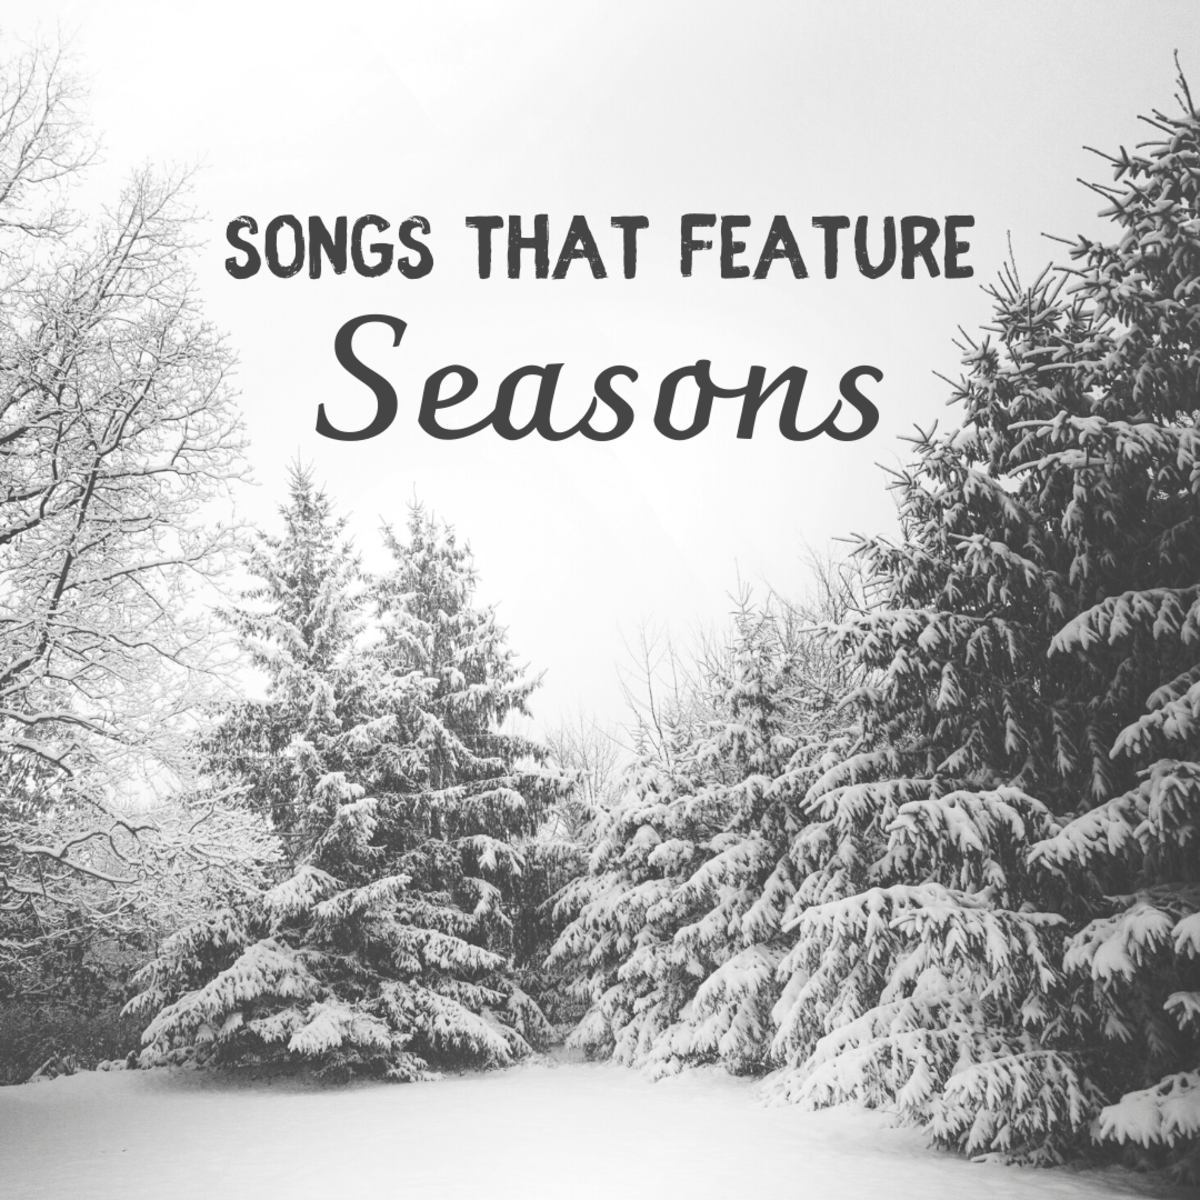 100 Best Songs With Seasons in the Title